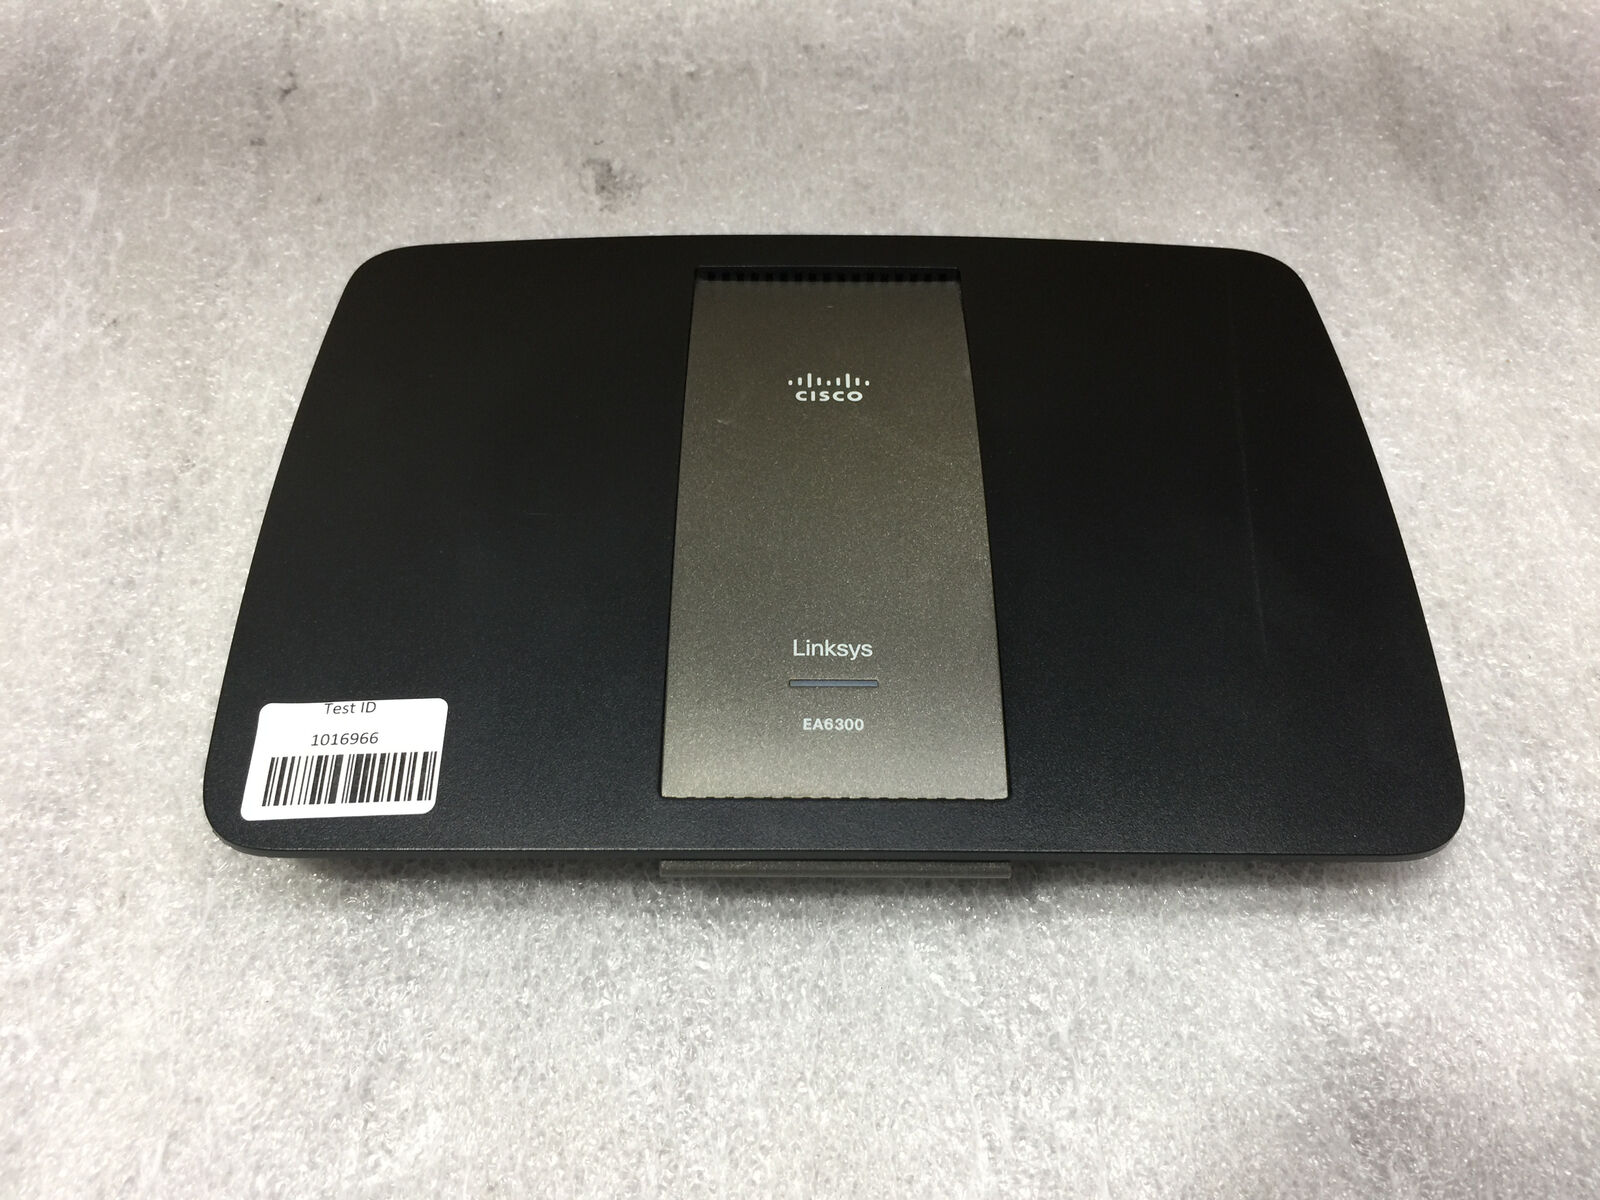 Cisco LinkSys EA6300 4-Port Gigabit Wireless Router, NO POWER CORD -TESTED/RESET